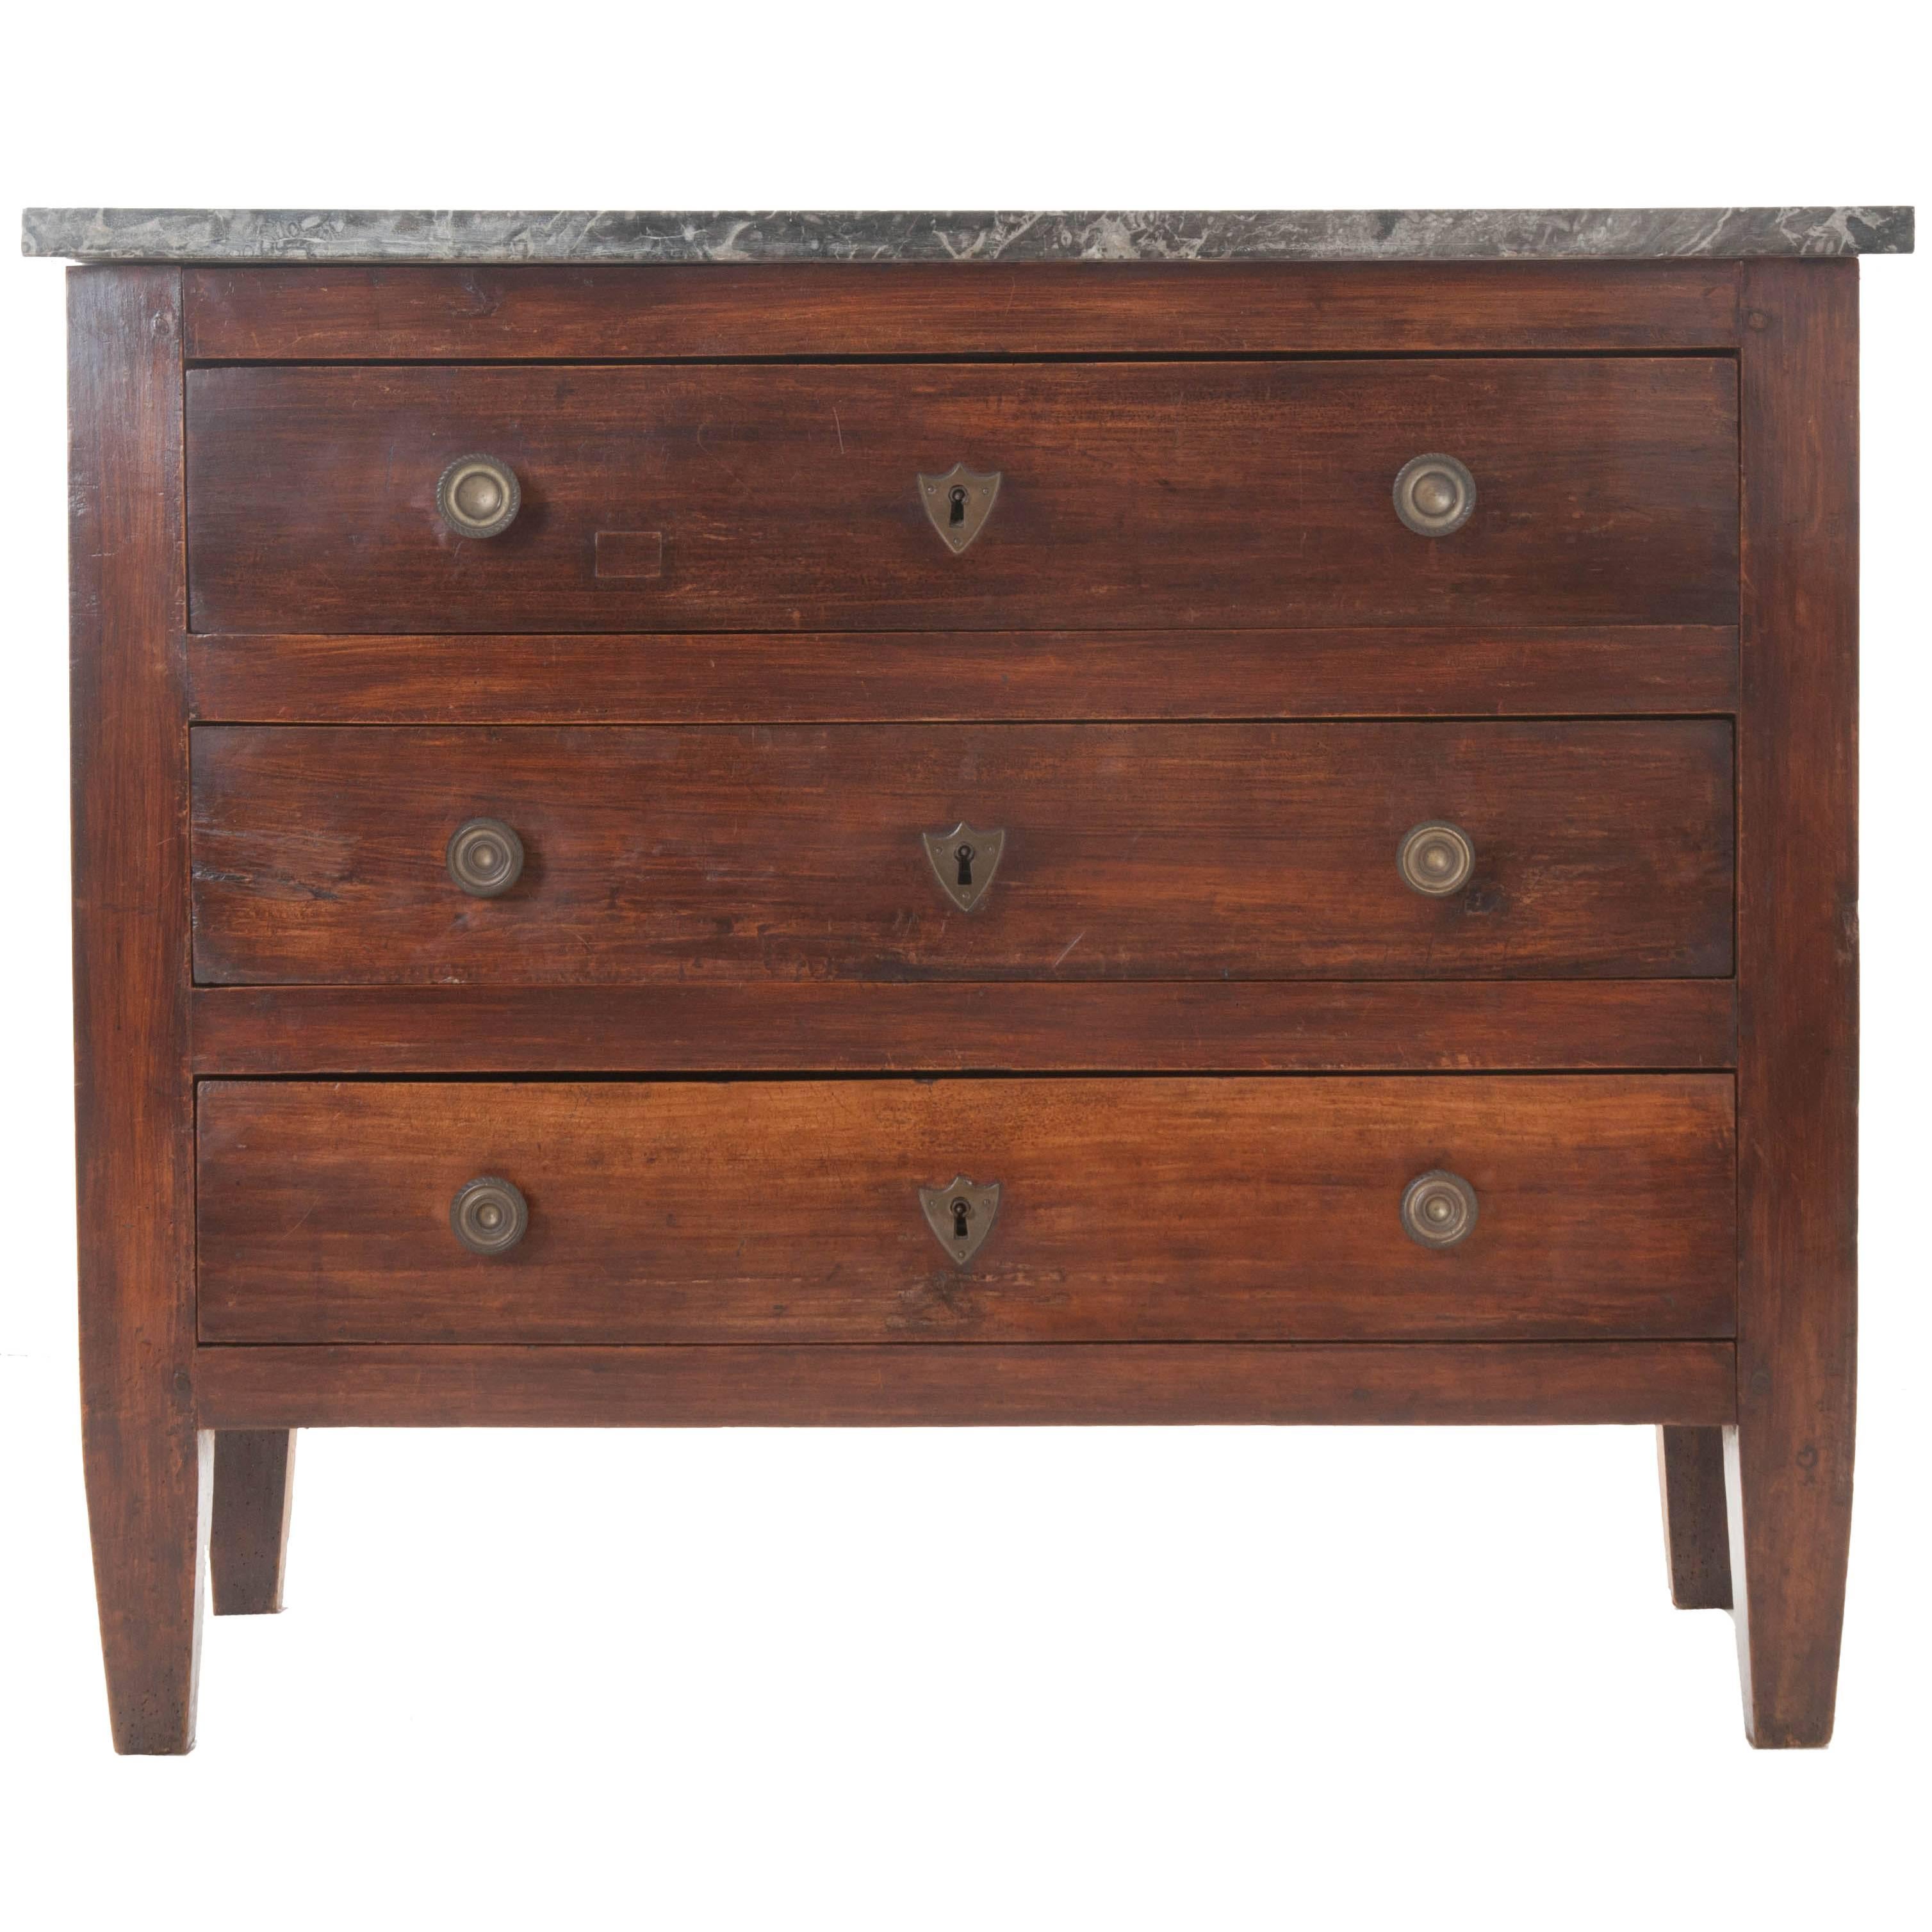 French, 19th Century Transitional Commode with Marble Top